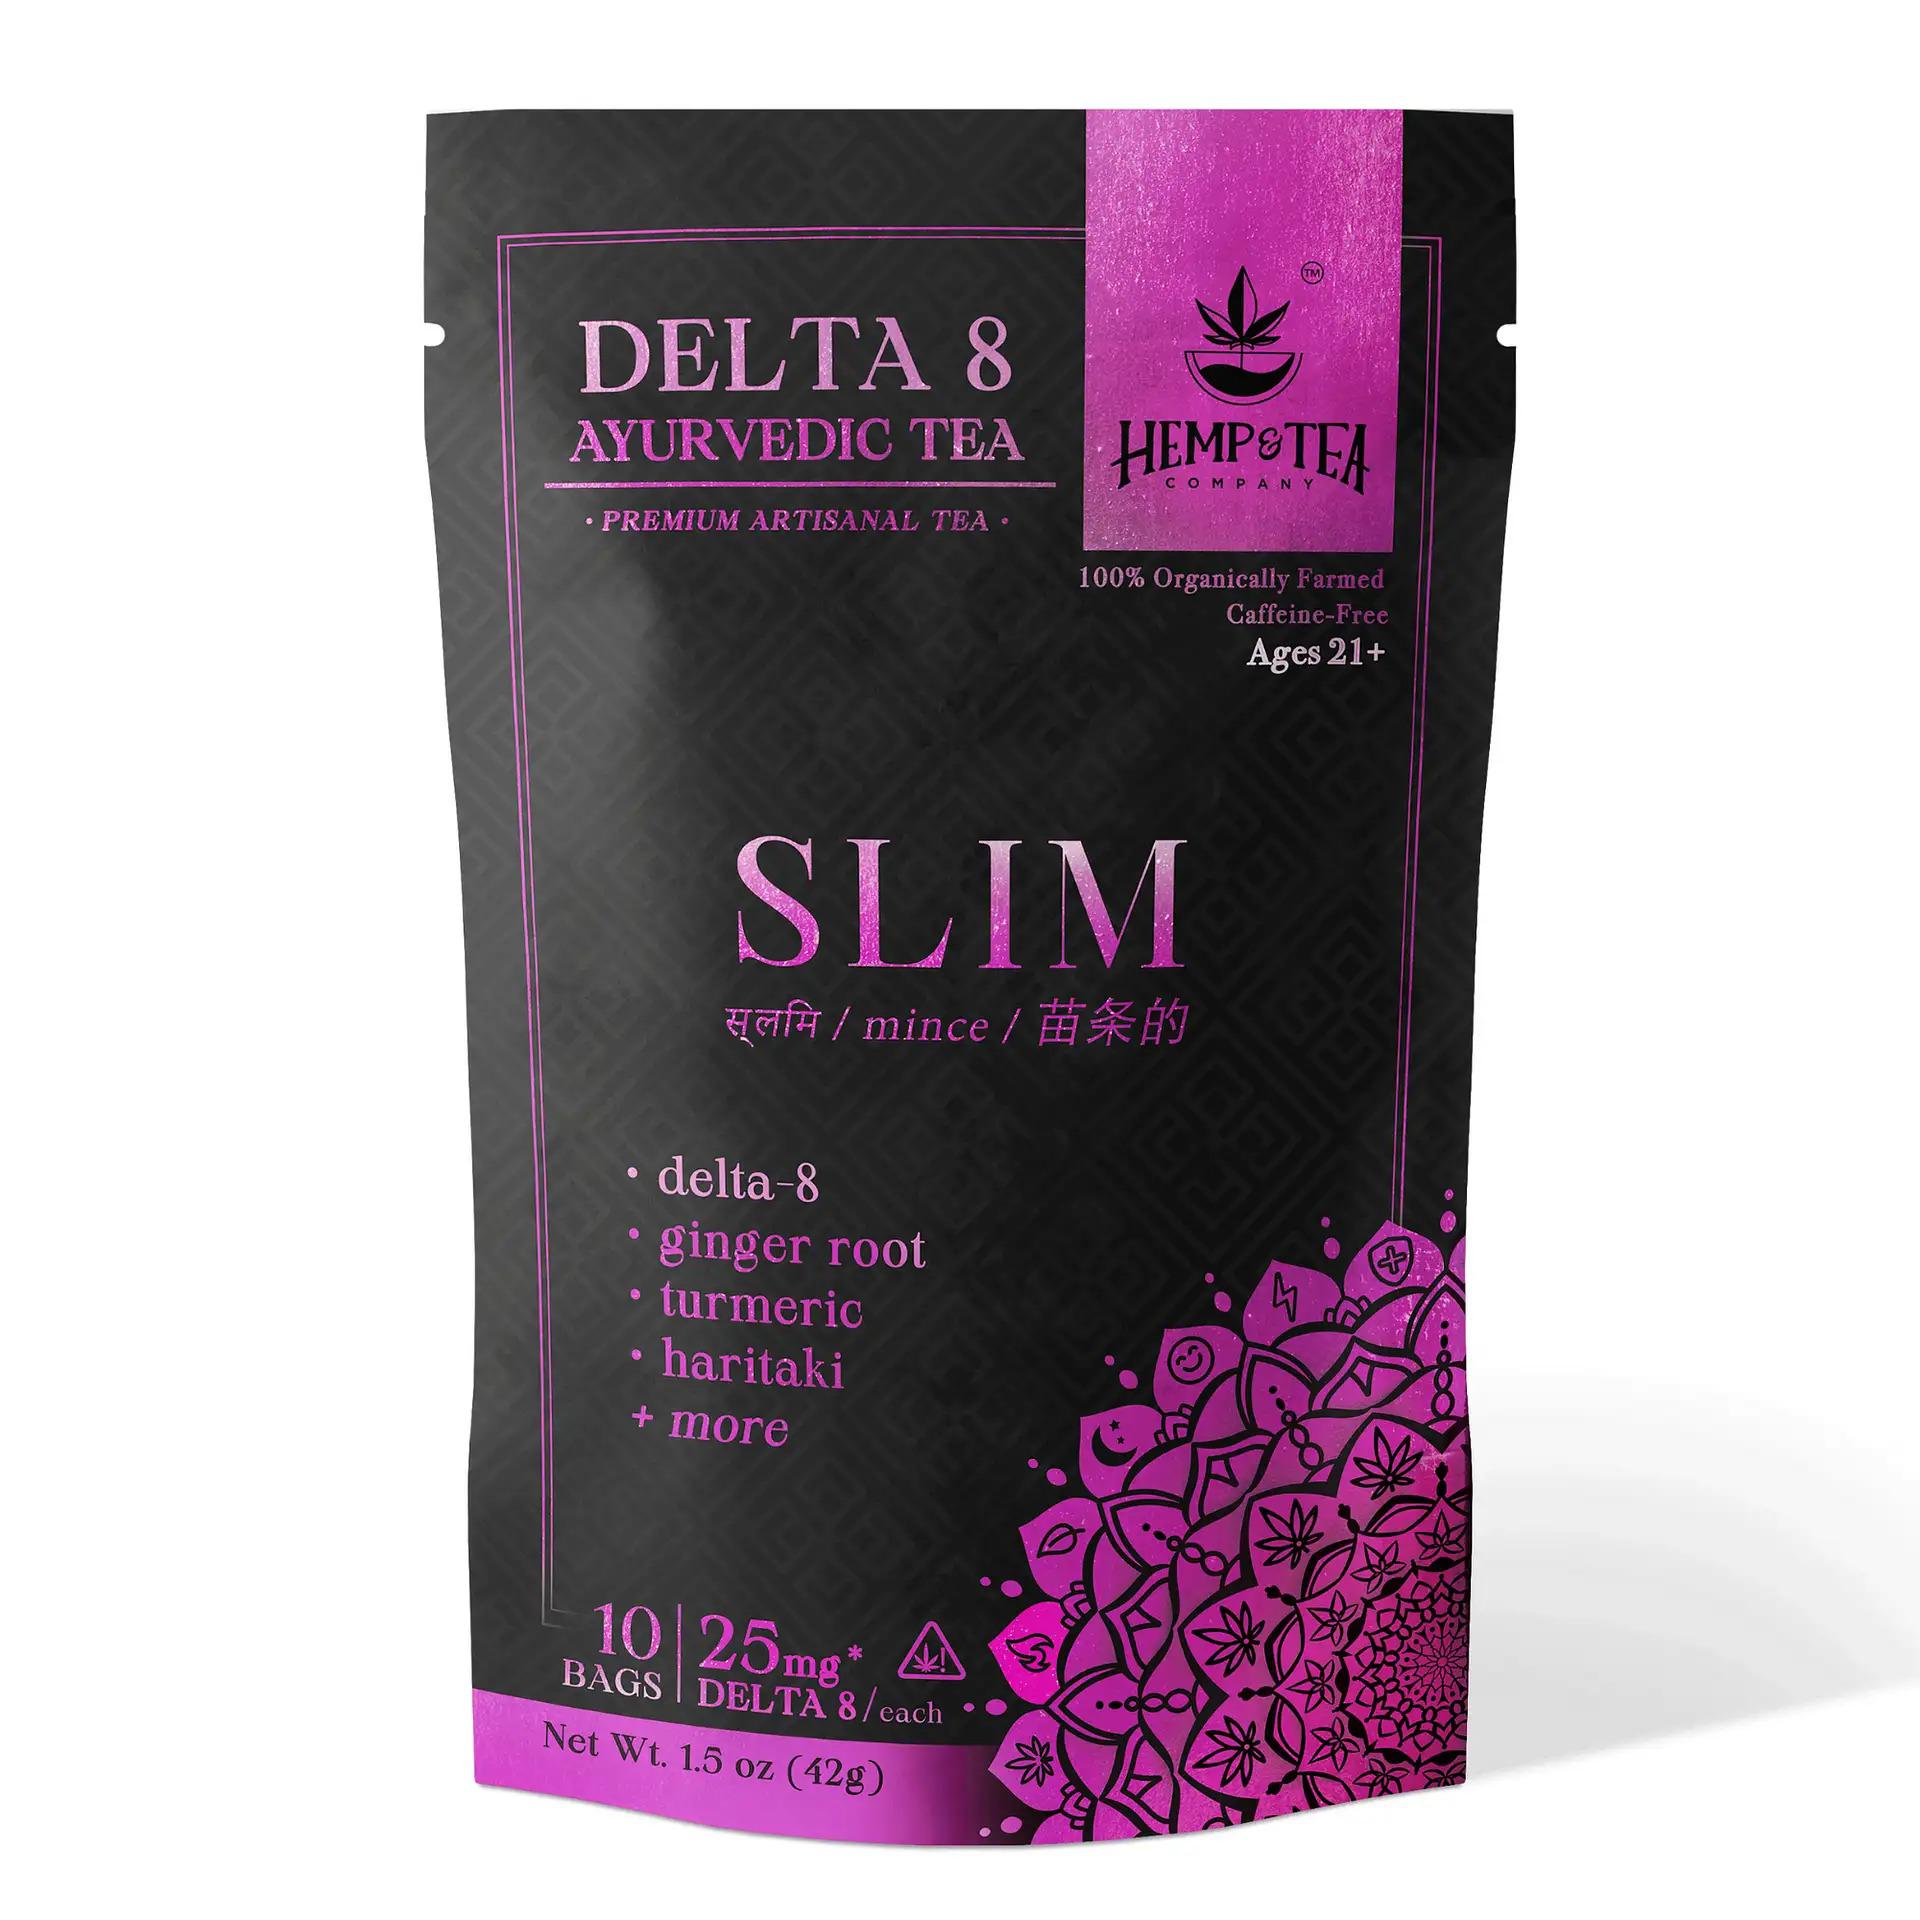 Slim and tone with our hand-crafted Delta 8 Tea Bags.

Our Slim blend is designed with water-soluble Delta 8, which is FOUR TIMES more bioavailable than other forms. Along with our balancing Ayurvedic herbs, this tea will ease appetite, boost metabolism, and aid digestion through relaxation.